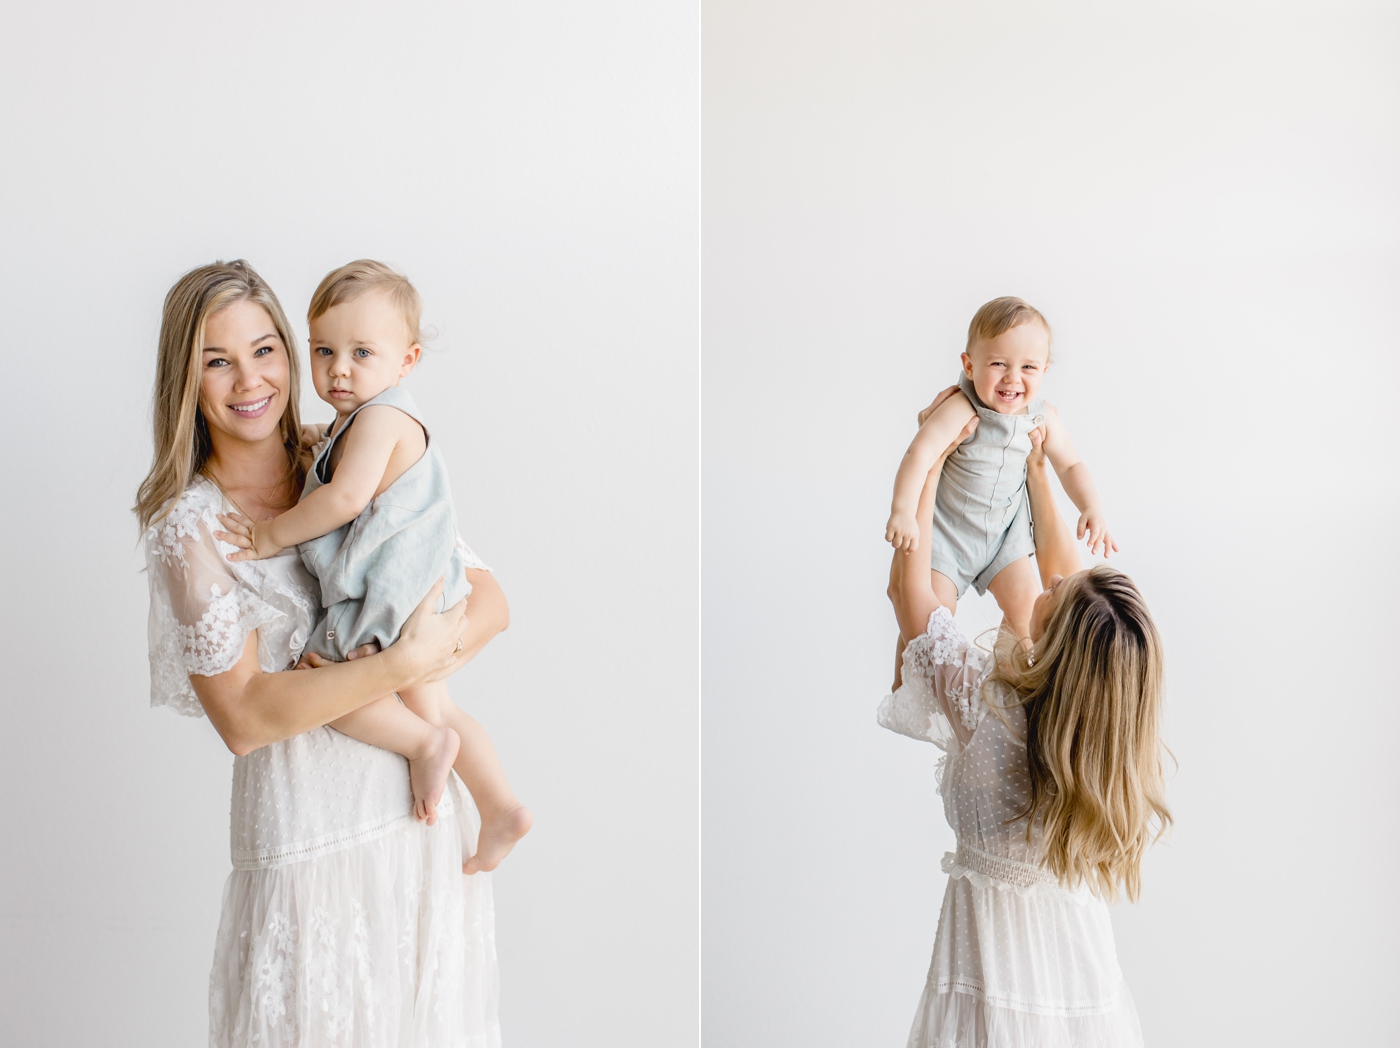 Mother and son photos by Sana Ahmed Photography in her natural light studio in North Austin. 